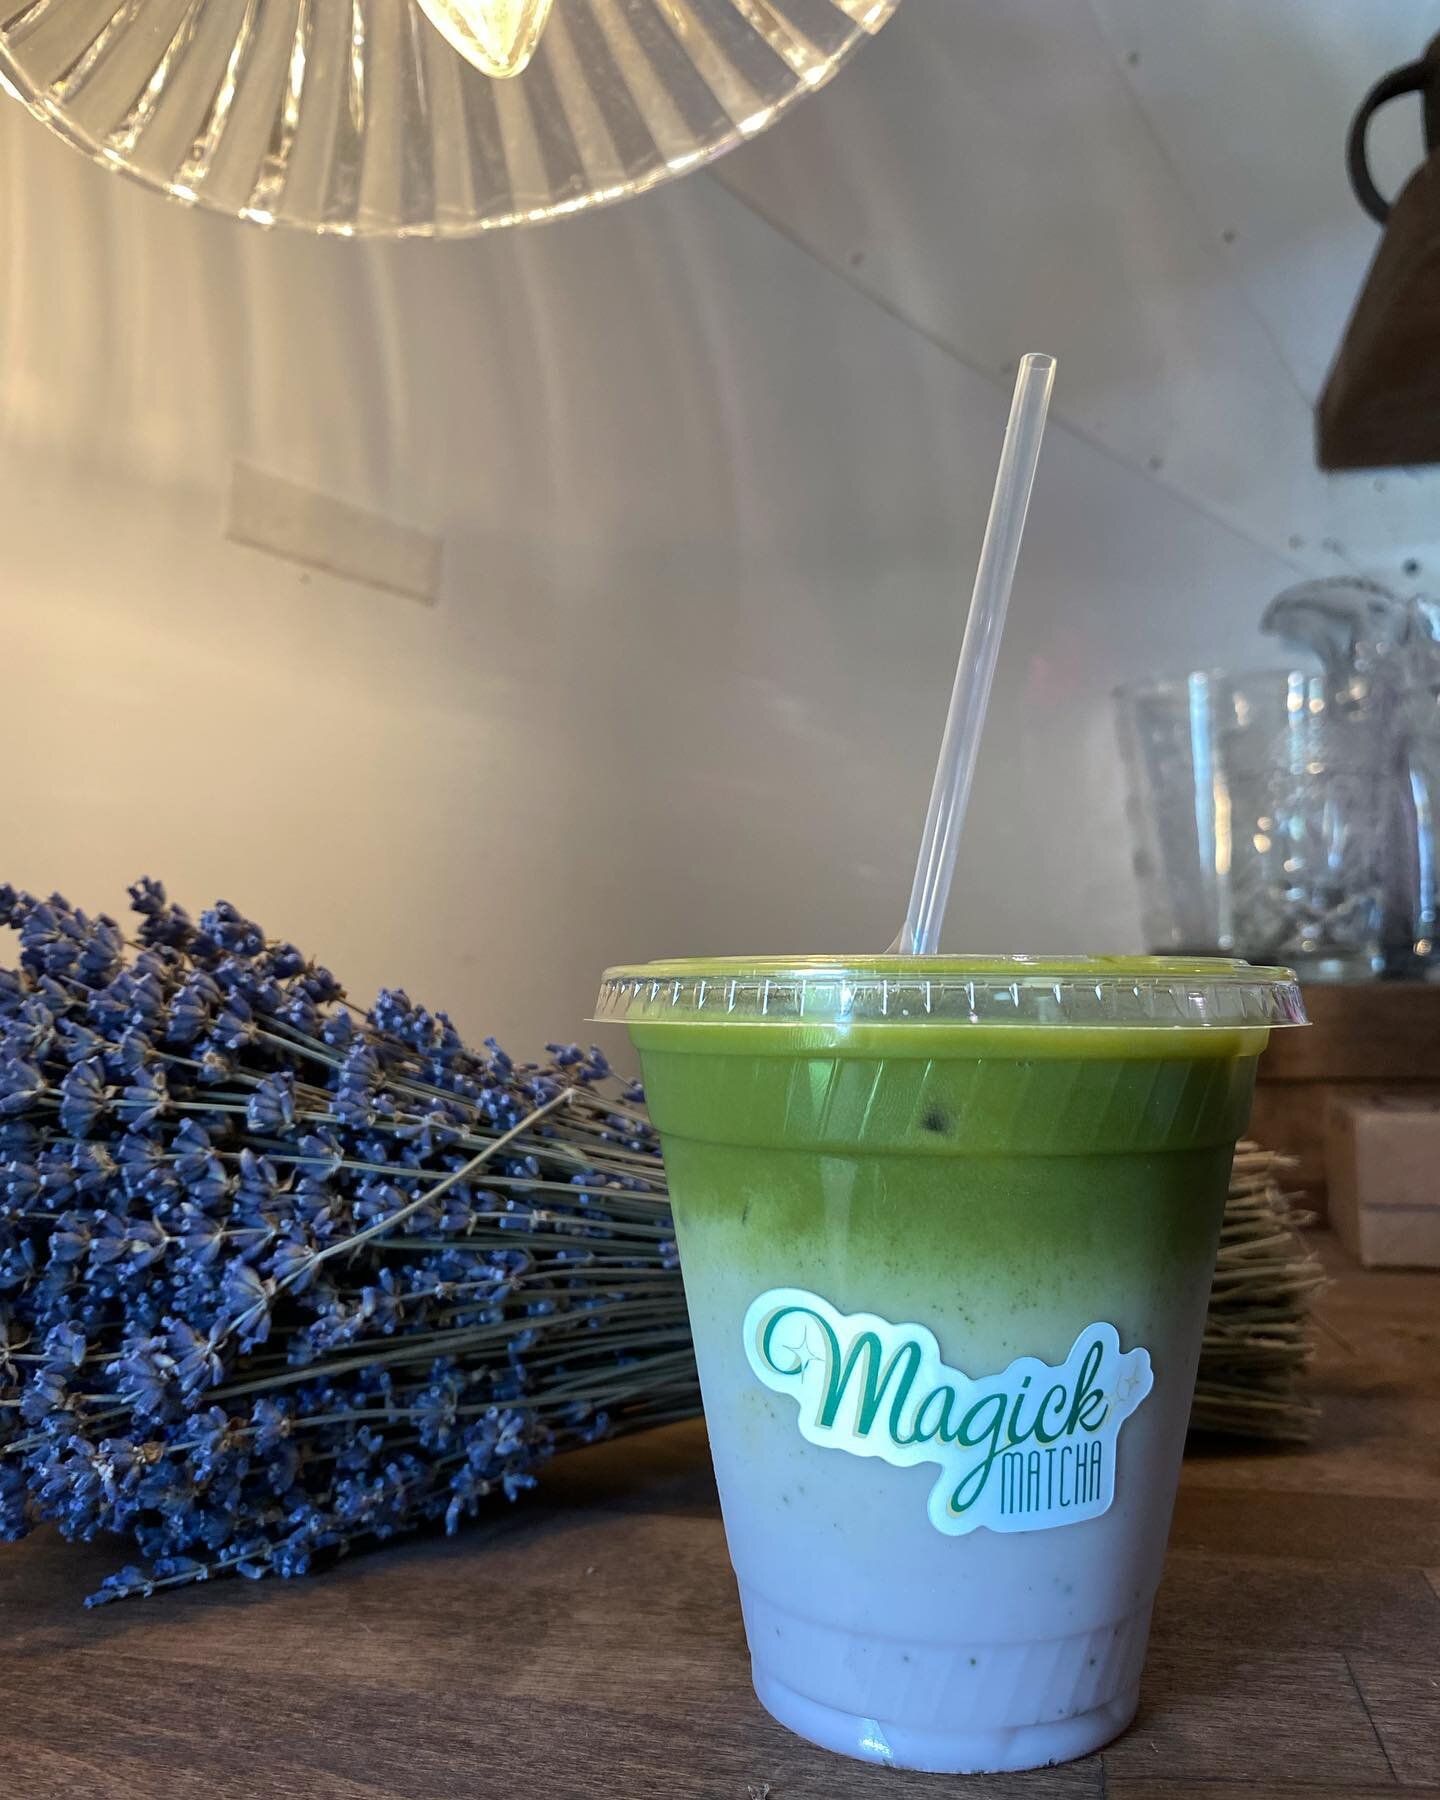 looking for a matcha without all the bells and whistles? our matcha latte is simple and delicious 🍵✨try it as is, or add in lavender syrup for an extra kick of flavor 

#matchalatte #atxfoodtruck #womanownedbusiness